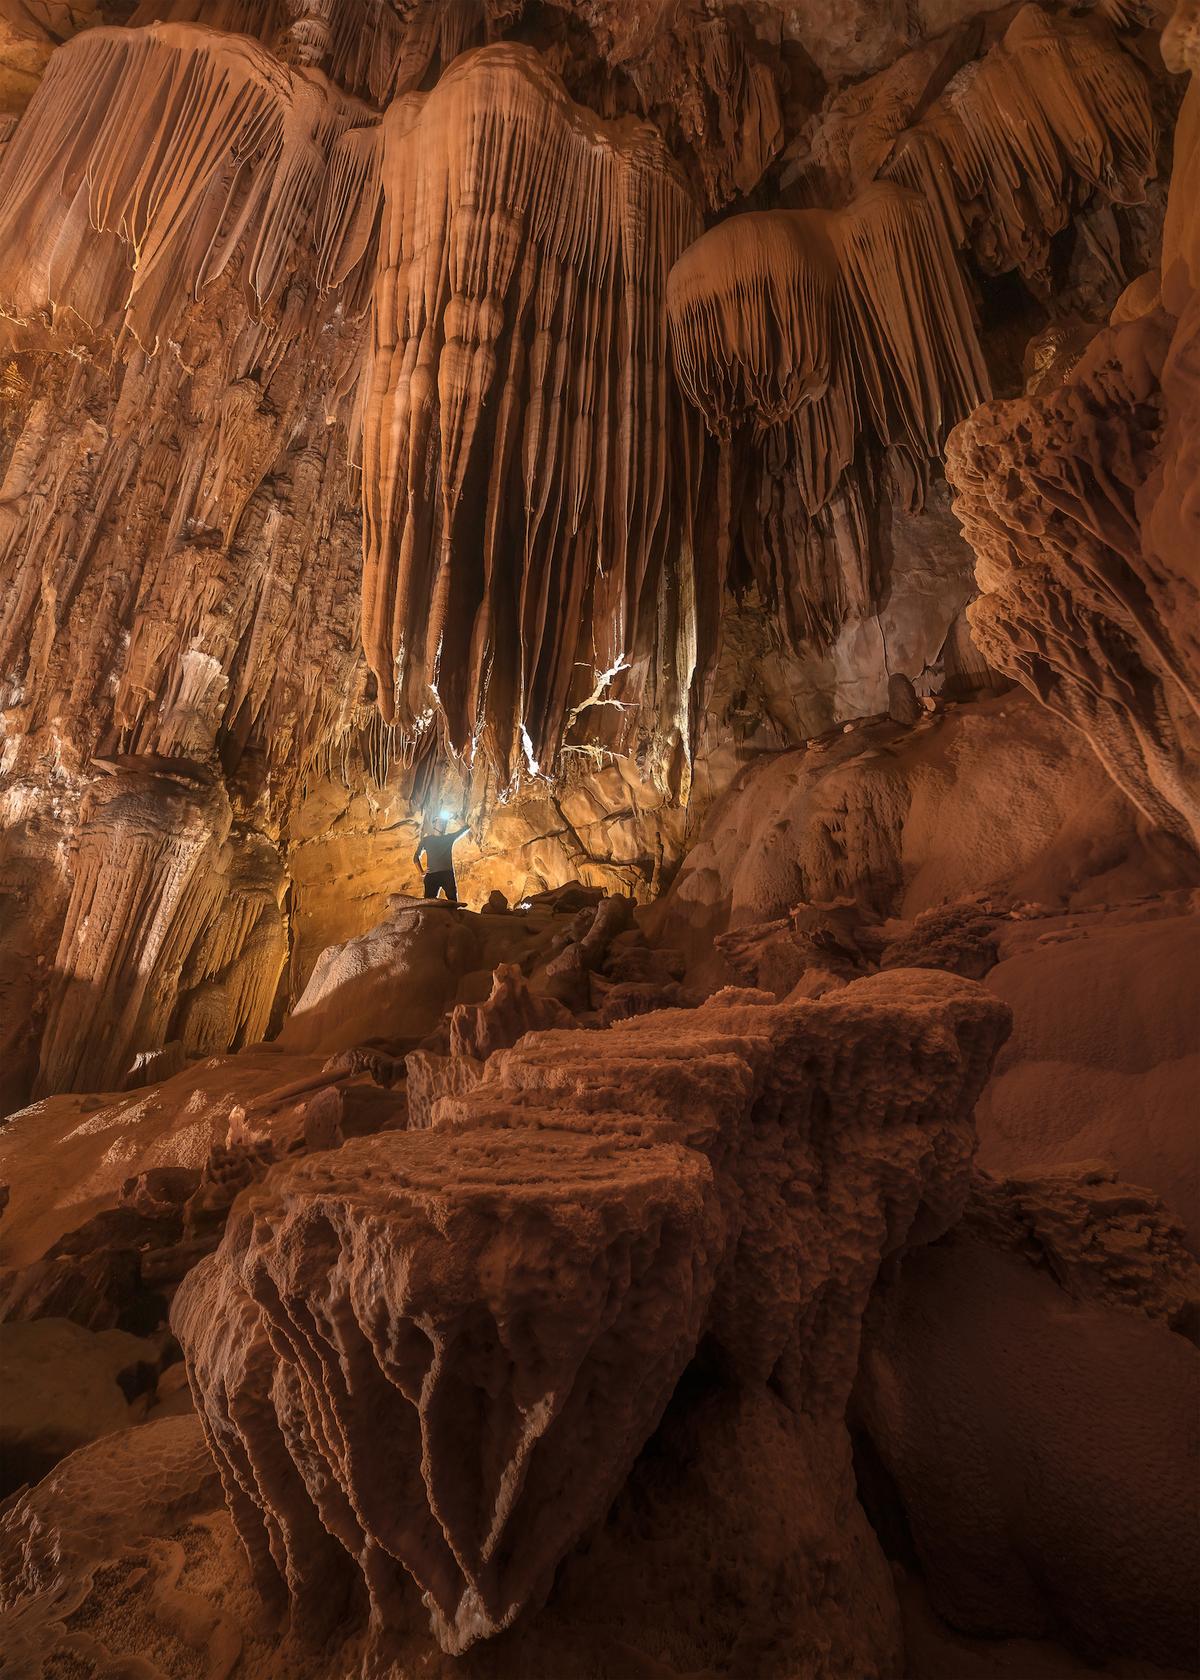 An explorer stands amid geological wonders inside Hung Thoòng Cave system. (Courtesy of Tran Linh via Jungle Boss Tours)